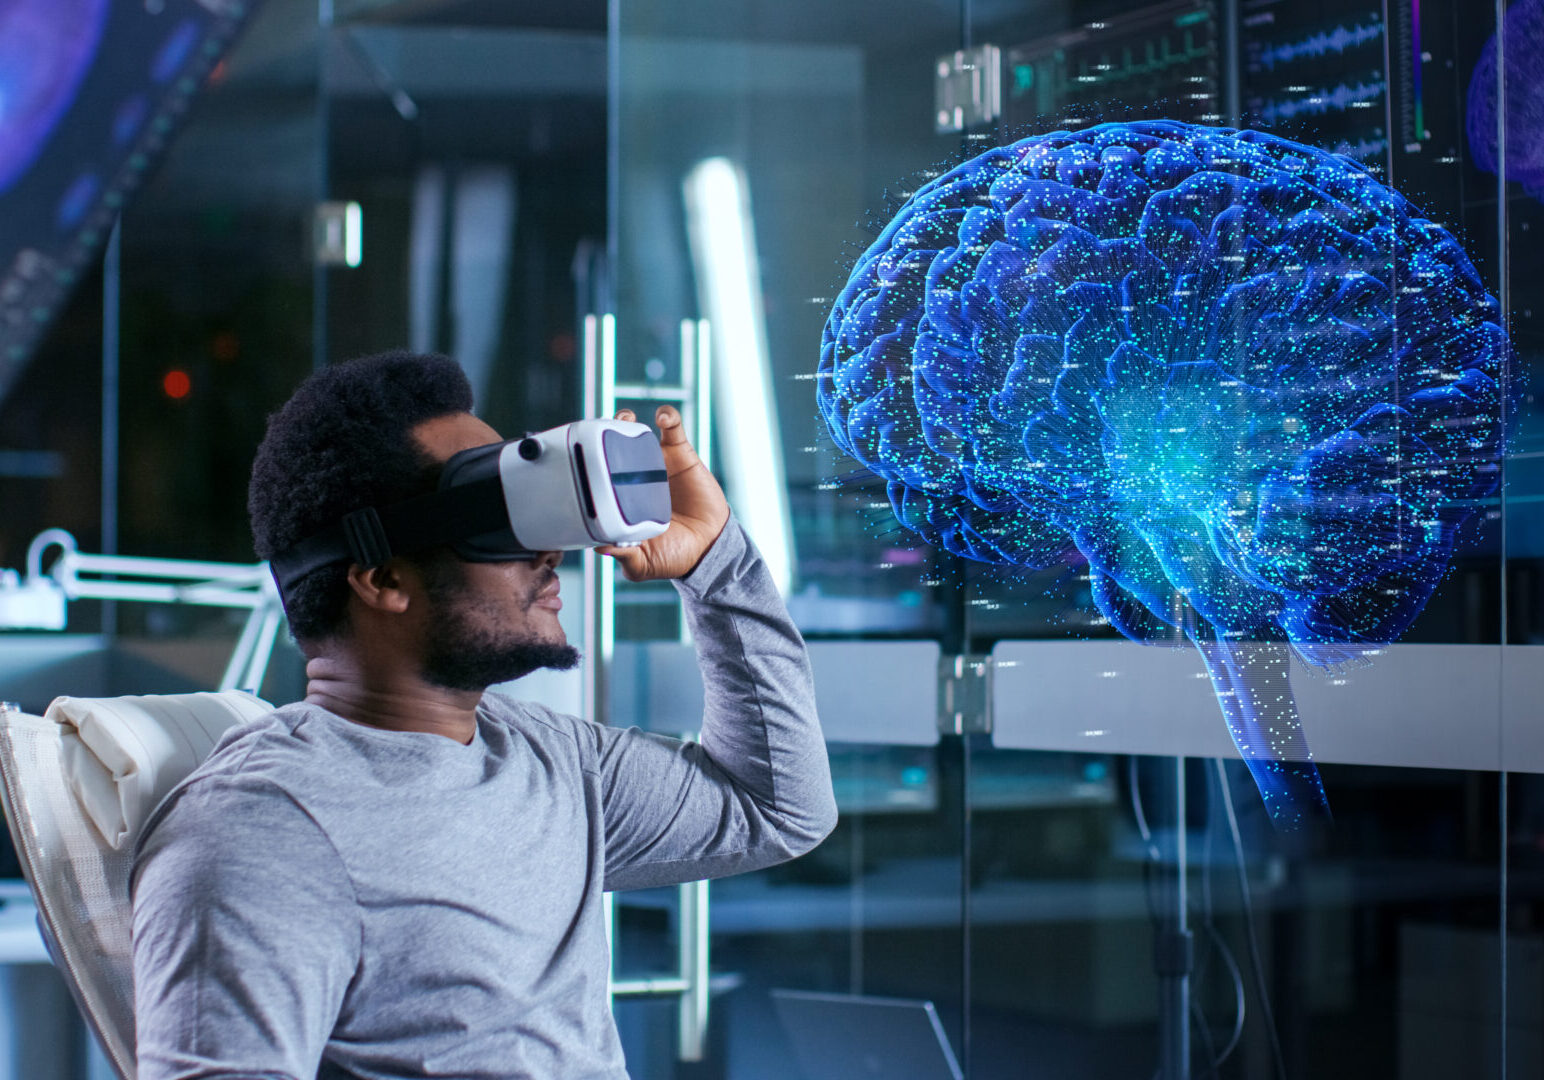 In Laboratory Scientist Wearing Virtual Reality Headset Sitting in a Chair Interacts With Monitors Showing Brain Activity, and Neurological Data. Brain hologram. Modern Brain Study/ Neurological Research Center.